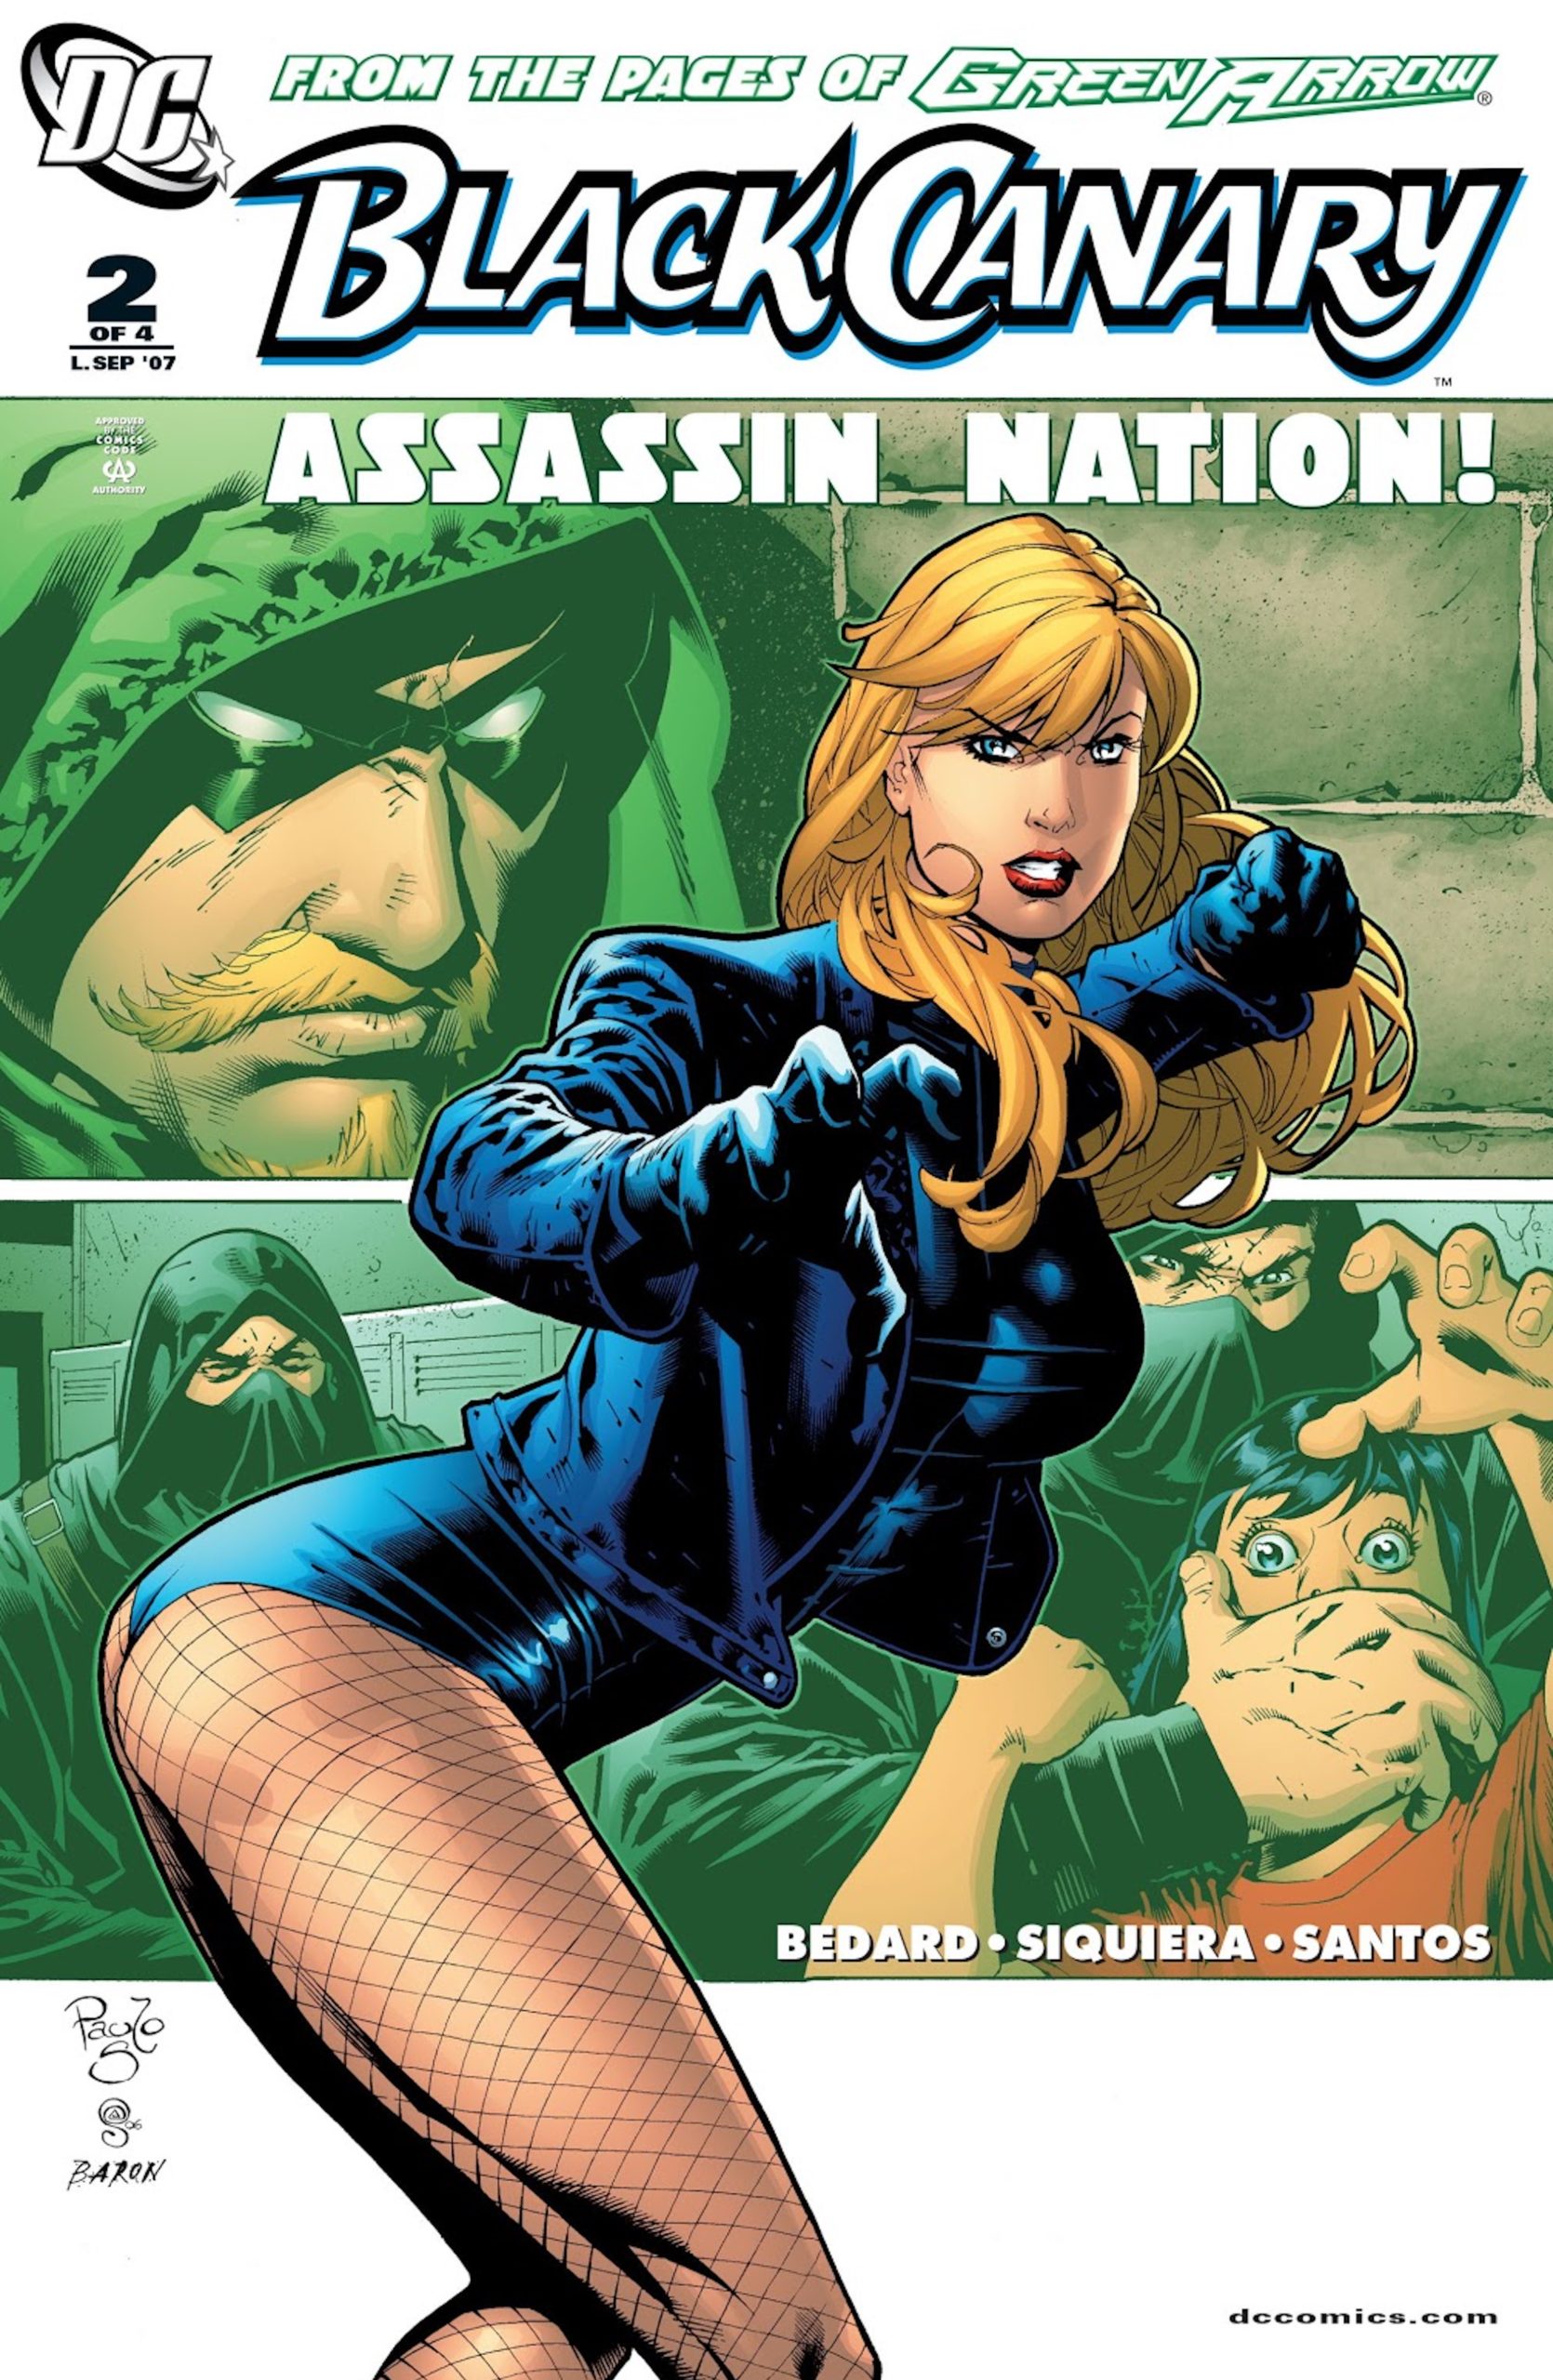 This image is from Black Canary #2 (2007), where the superhero can be seen looking overly sexualized and fragile. 